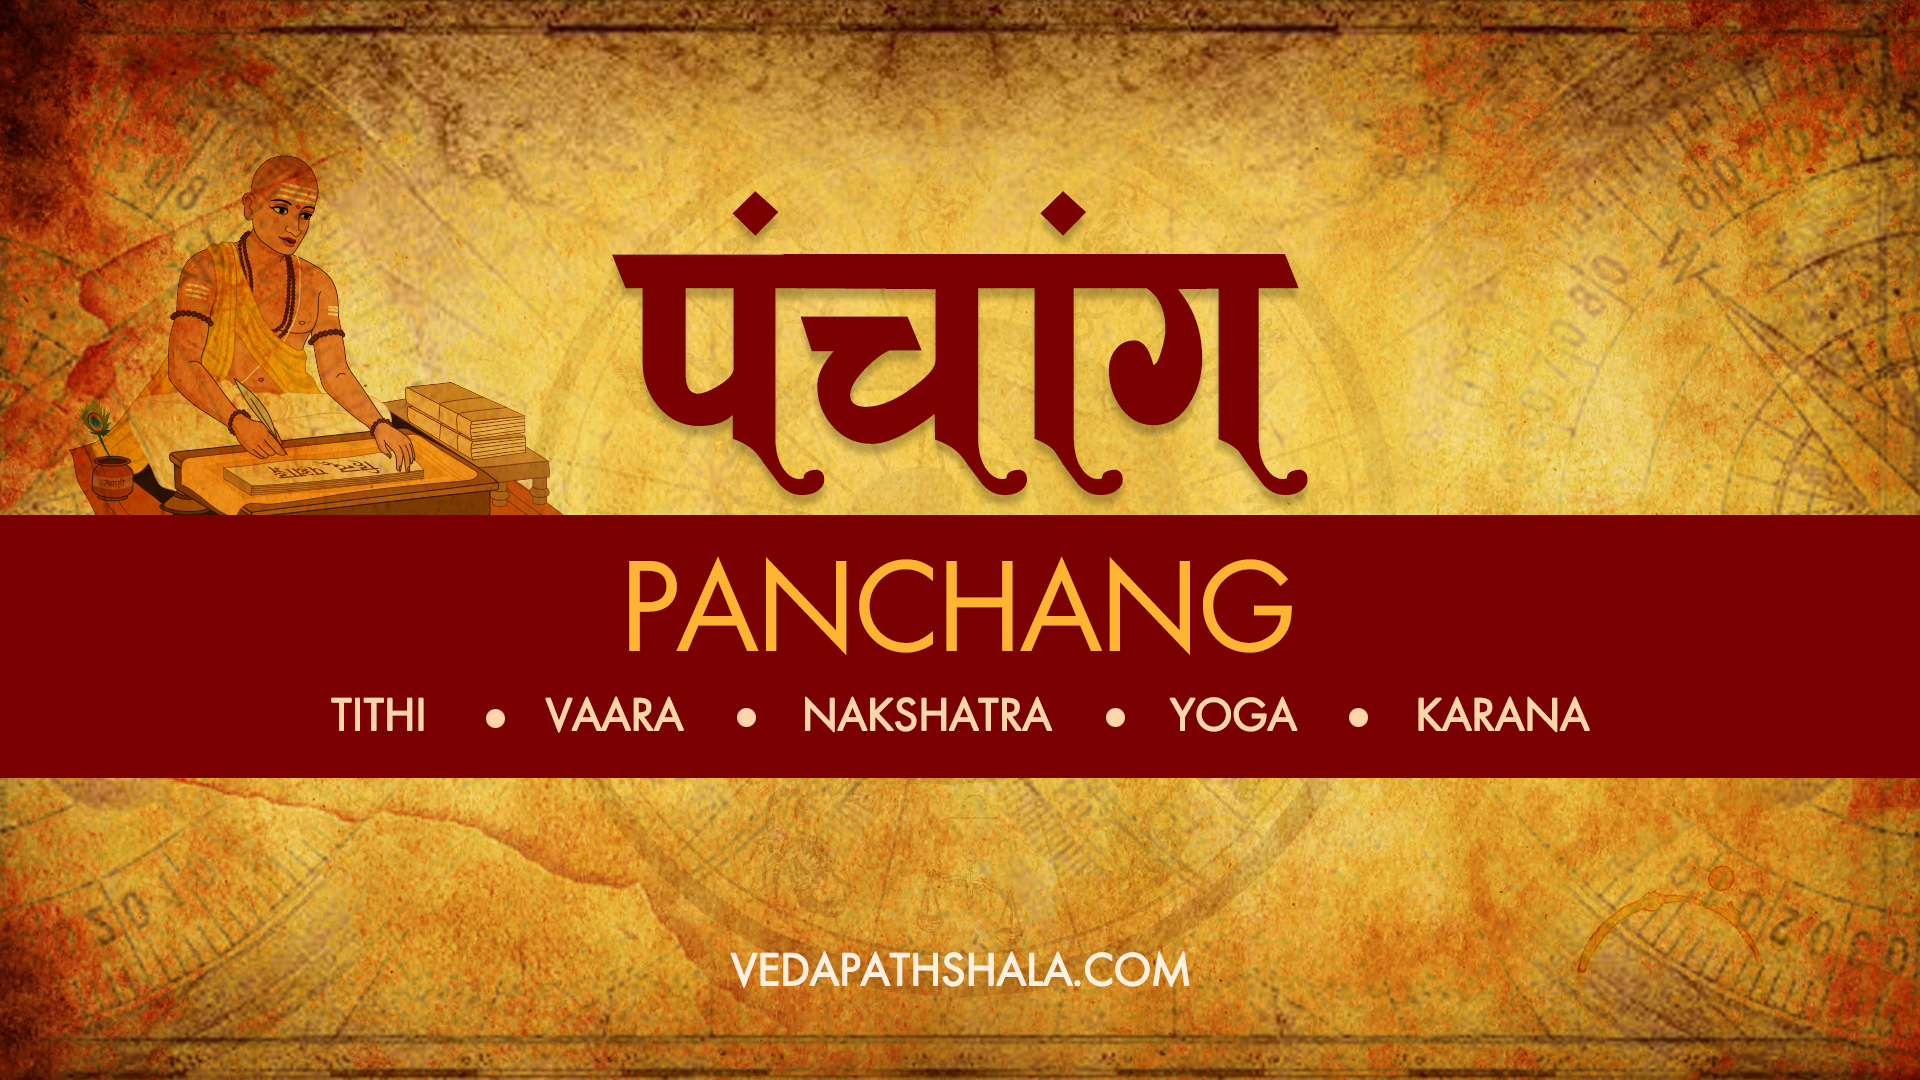 What is Panchang or Panchangam School of wisdom and knowledge